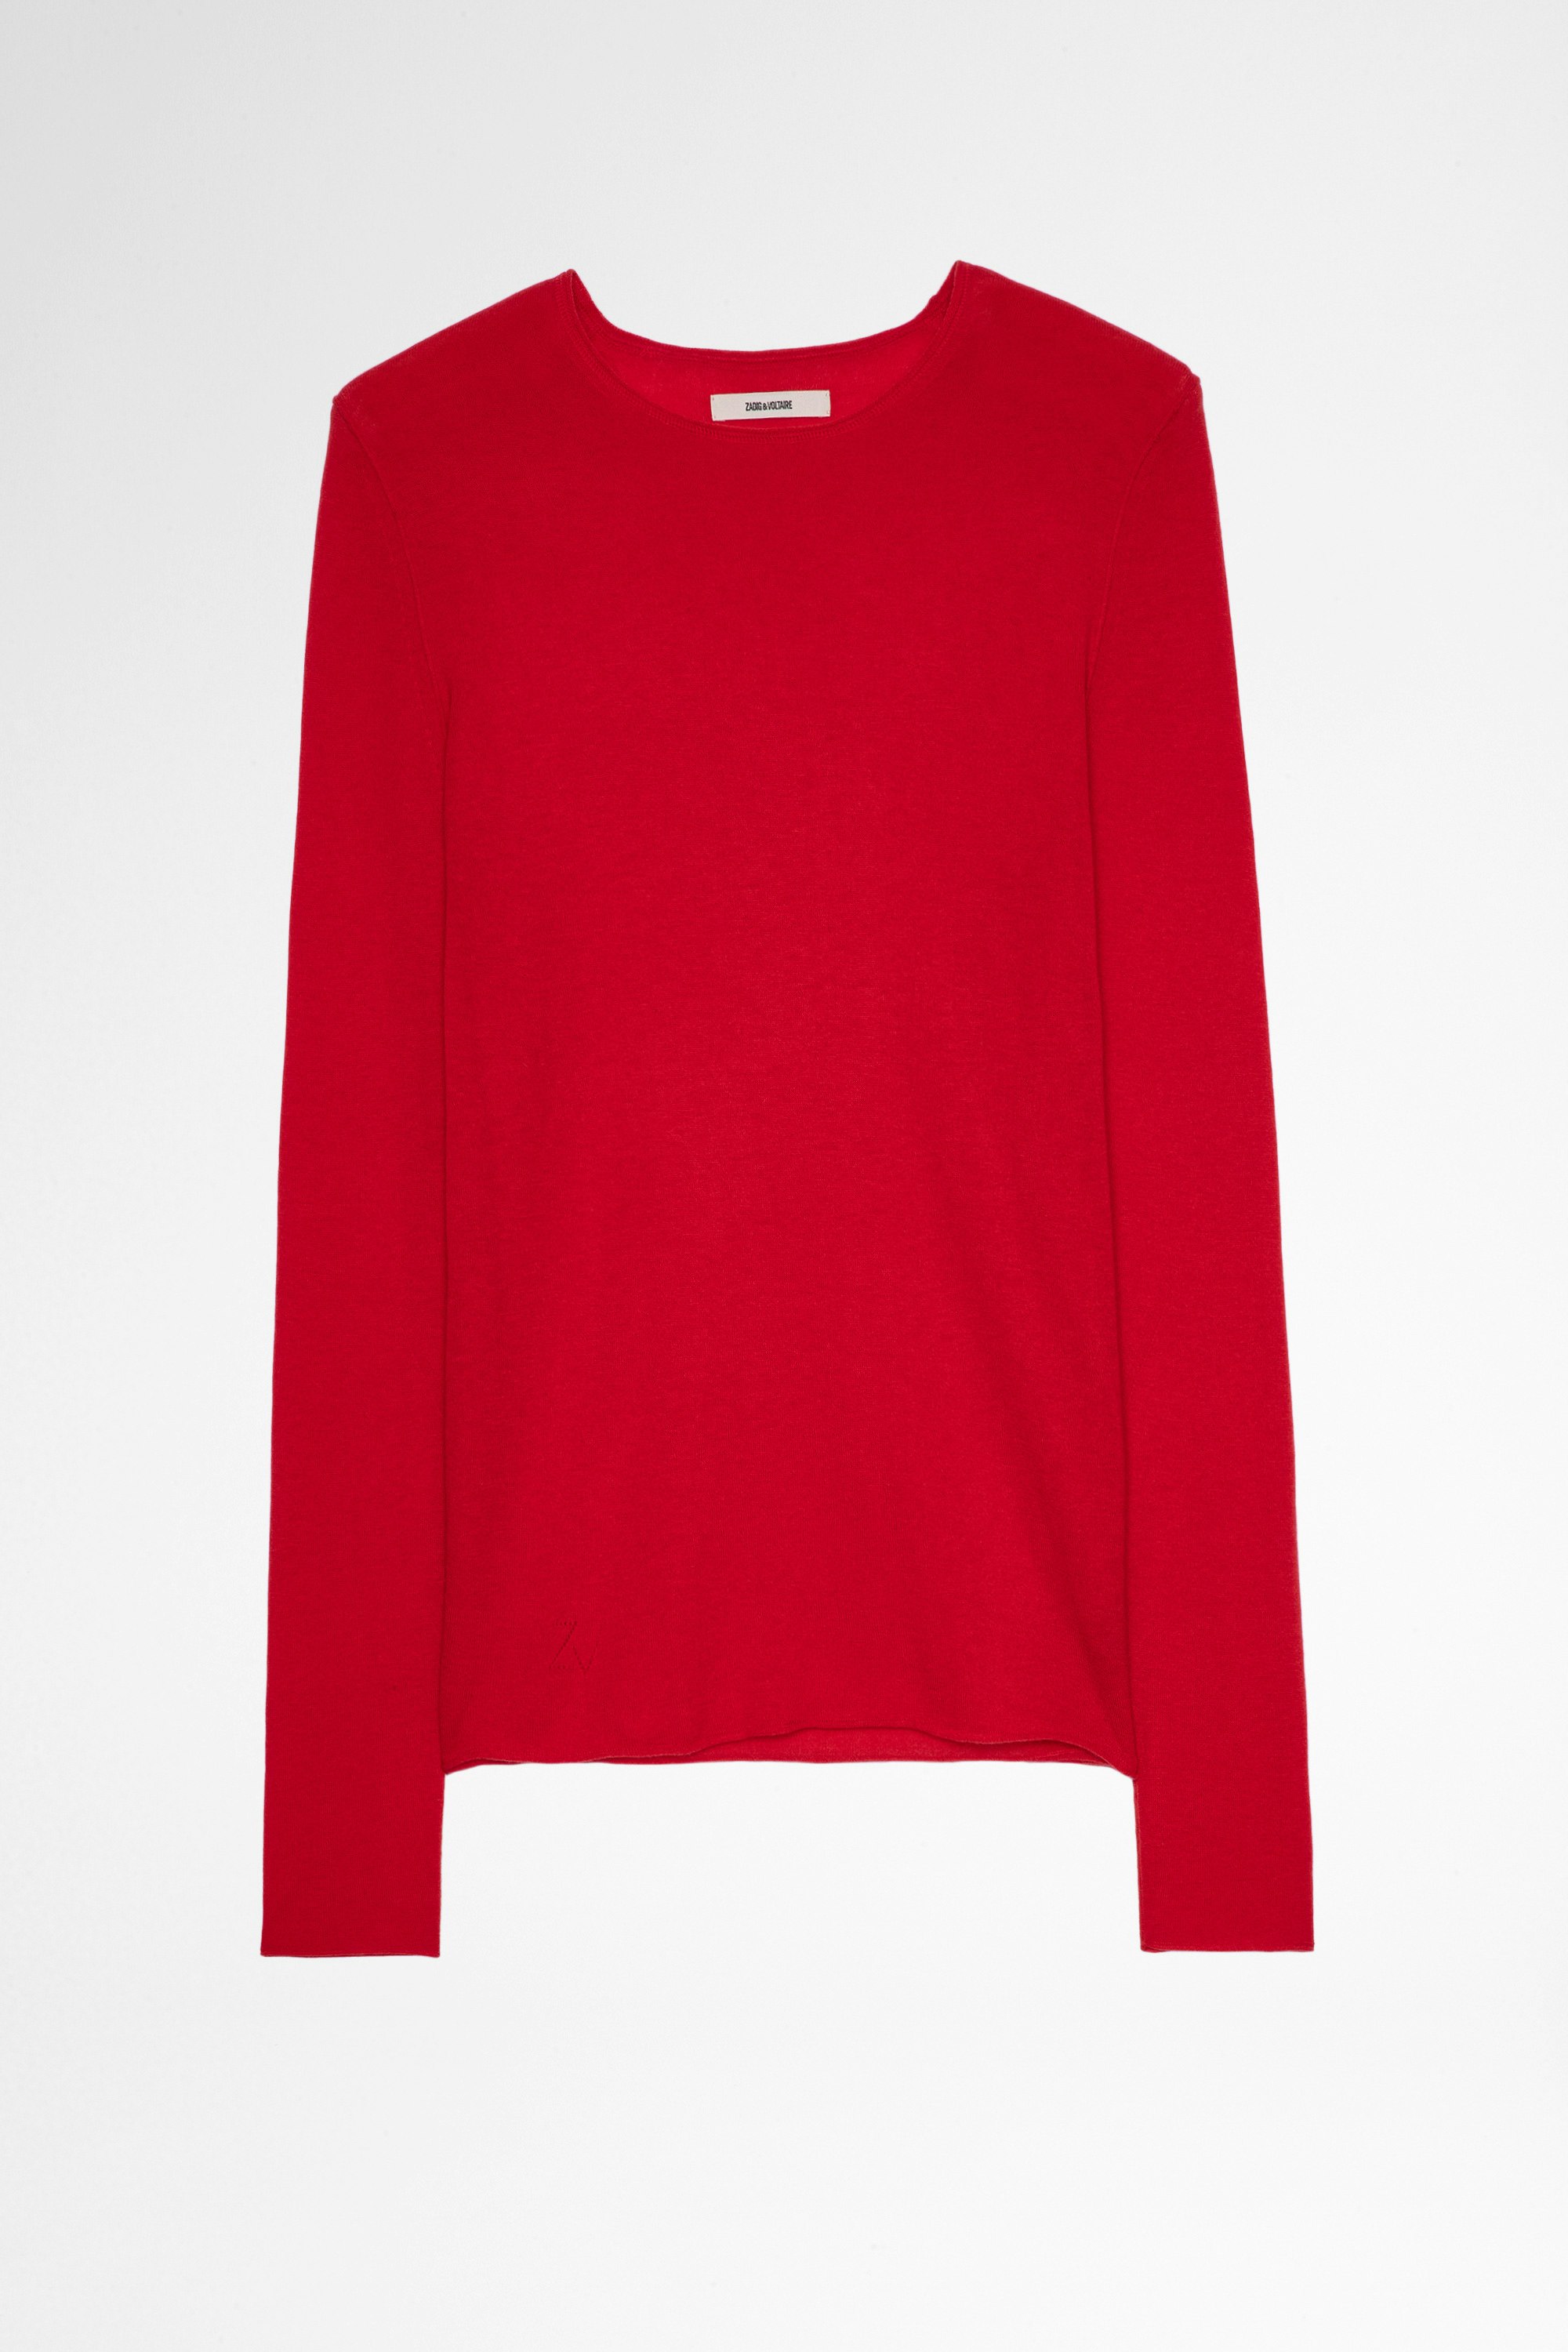 Teiss Cashmere Jumper Men's red cashmere sweater